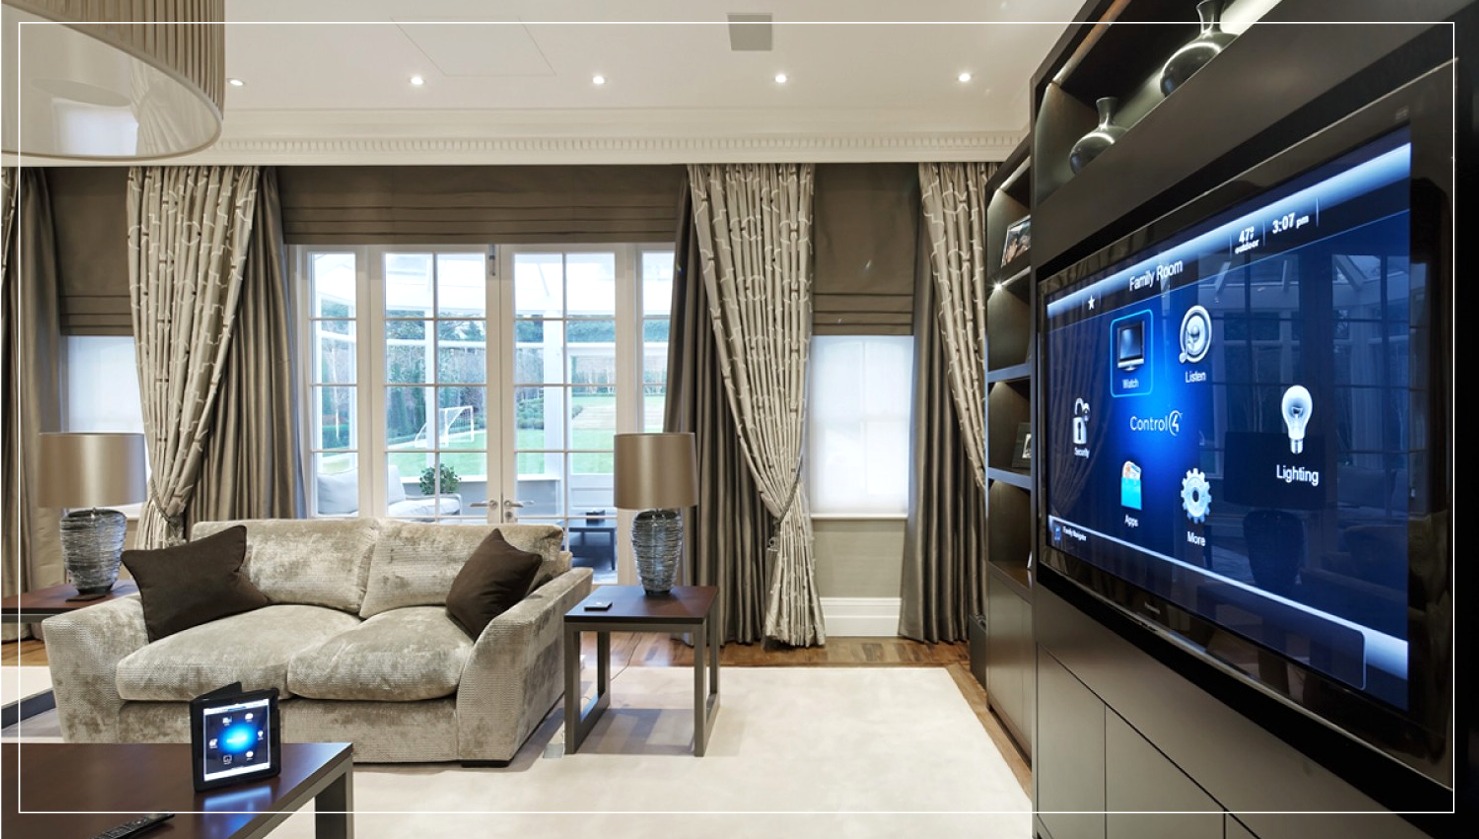 Home Automation Security System& Its Advantages To Home Owners!